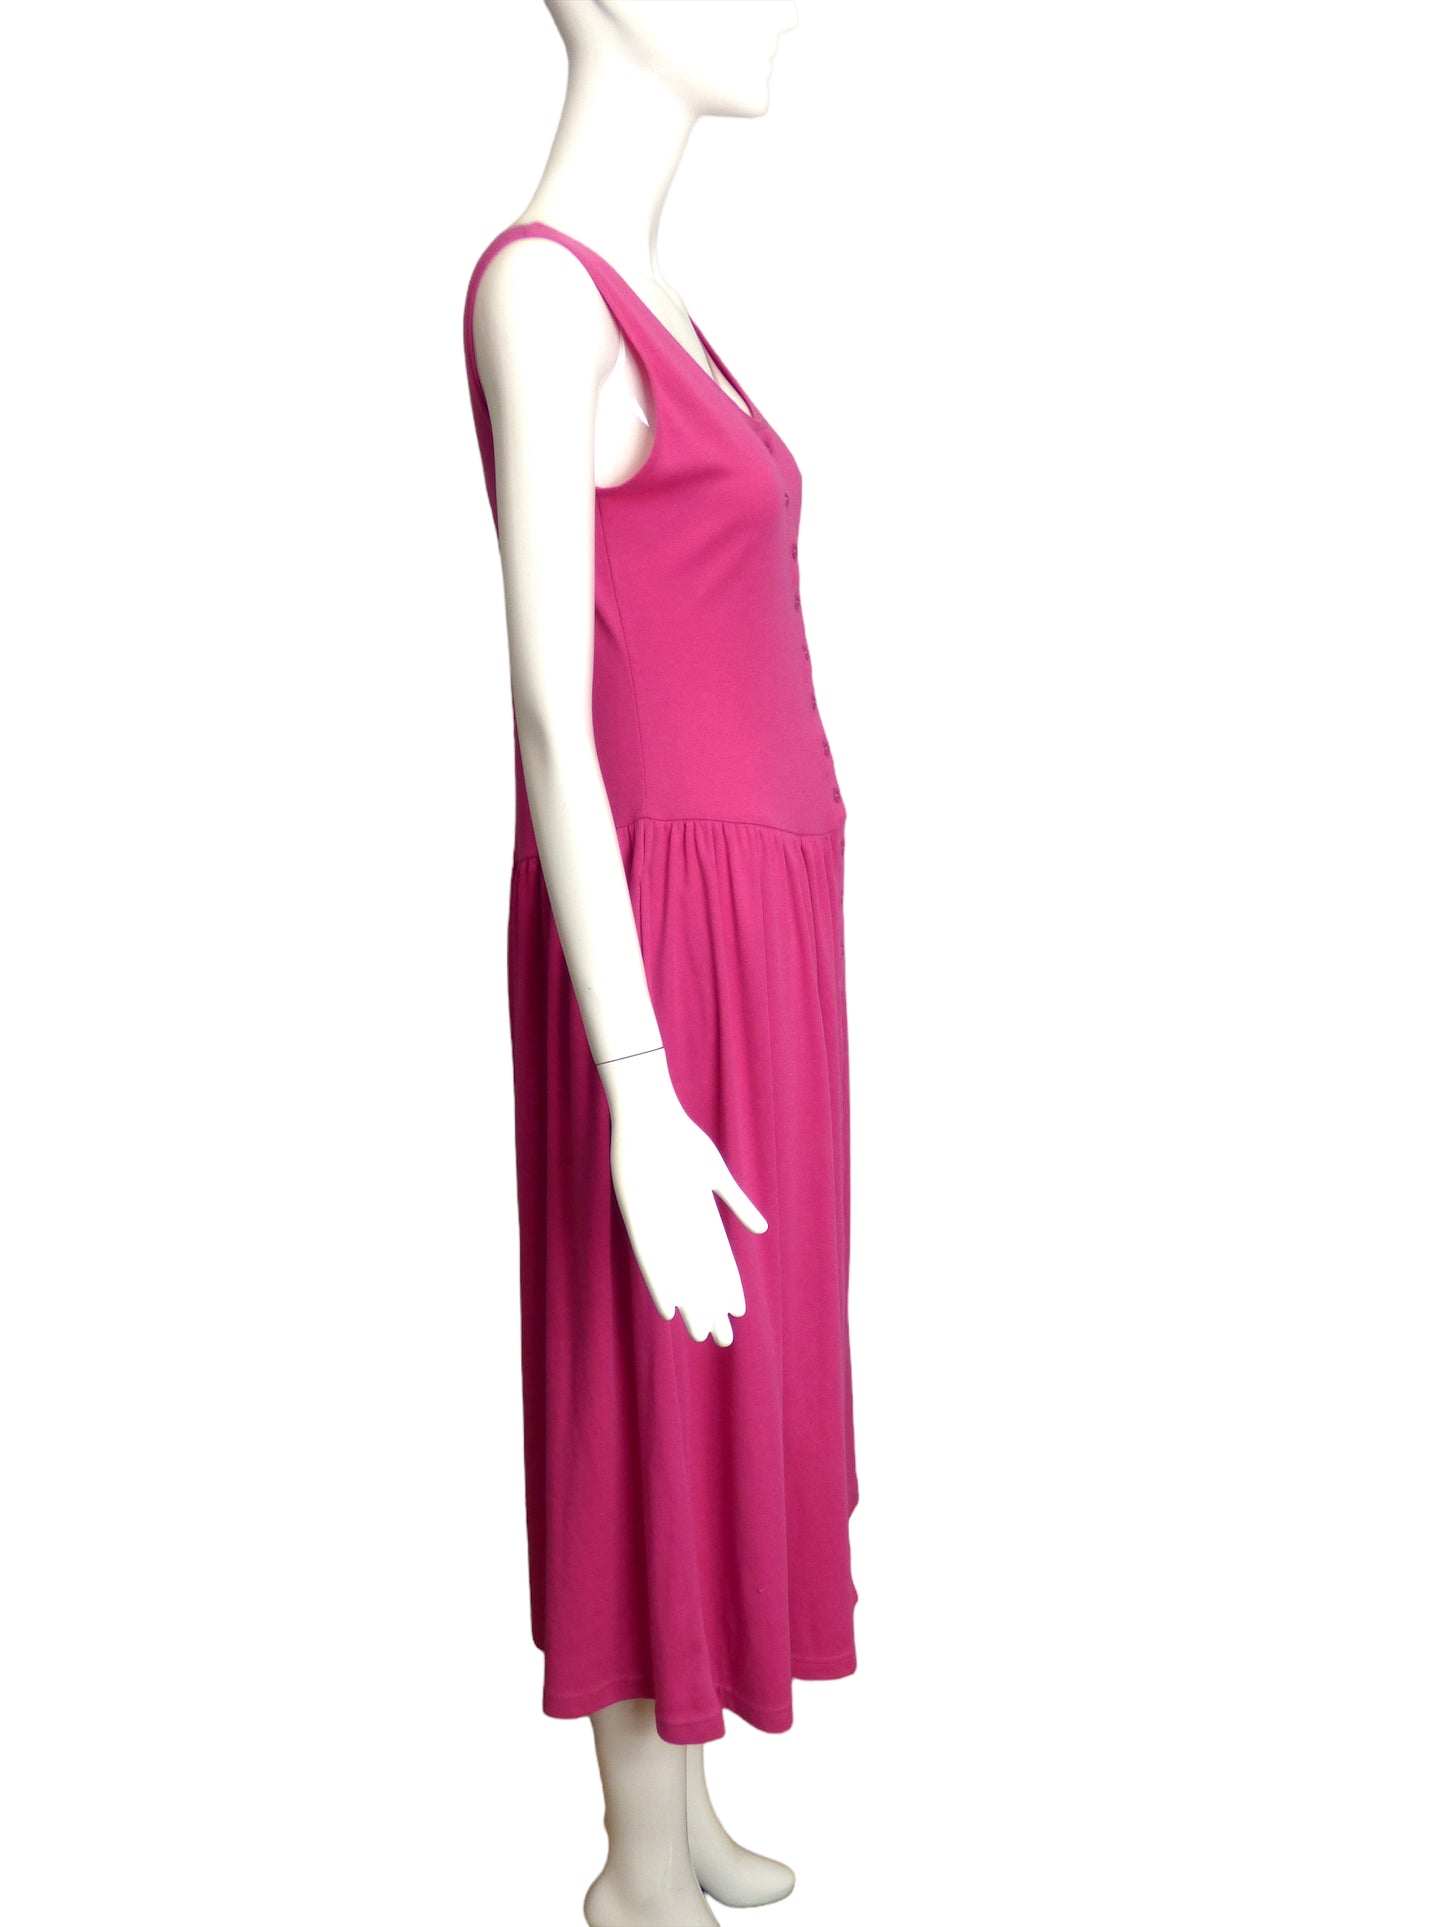 PIERRE CARDIN- NWT 1980s Pink Jersey Dress, Size-Small